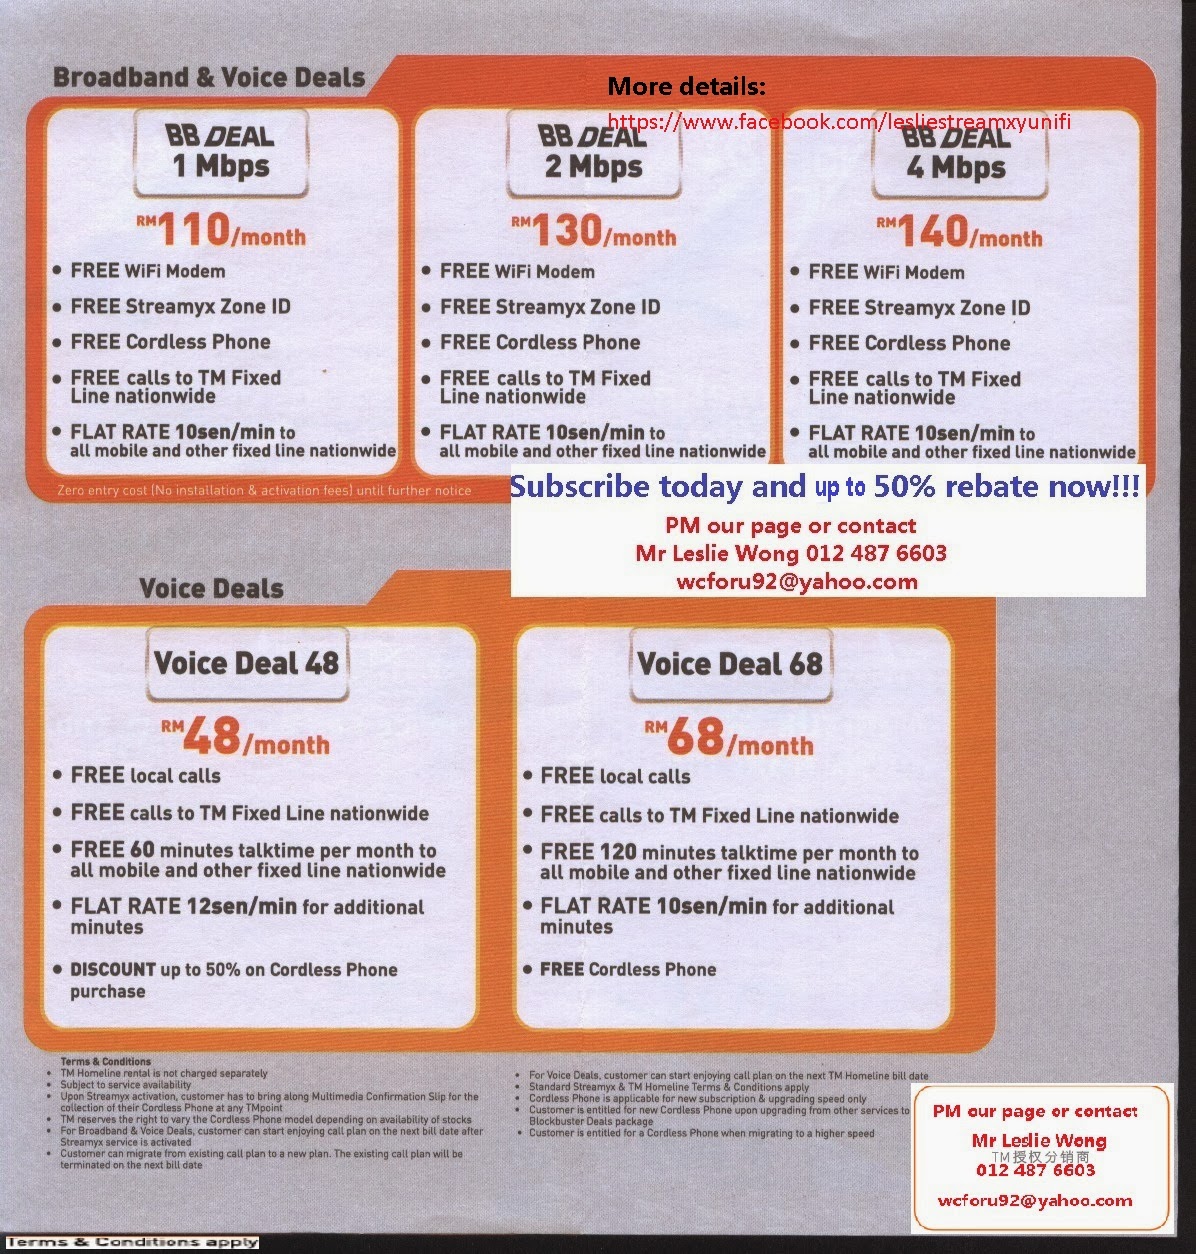 streamxy-unifi-cash-rebate-up-to-50-great-promotion-worthy-2013